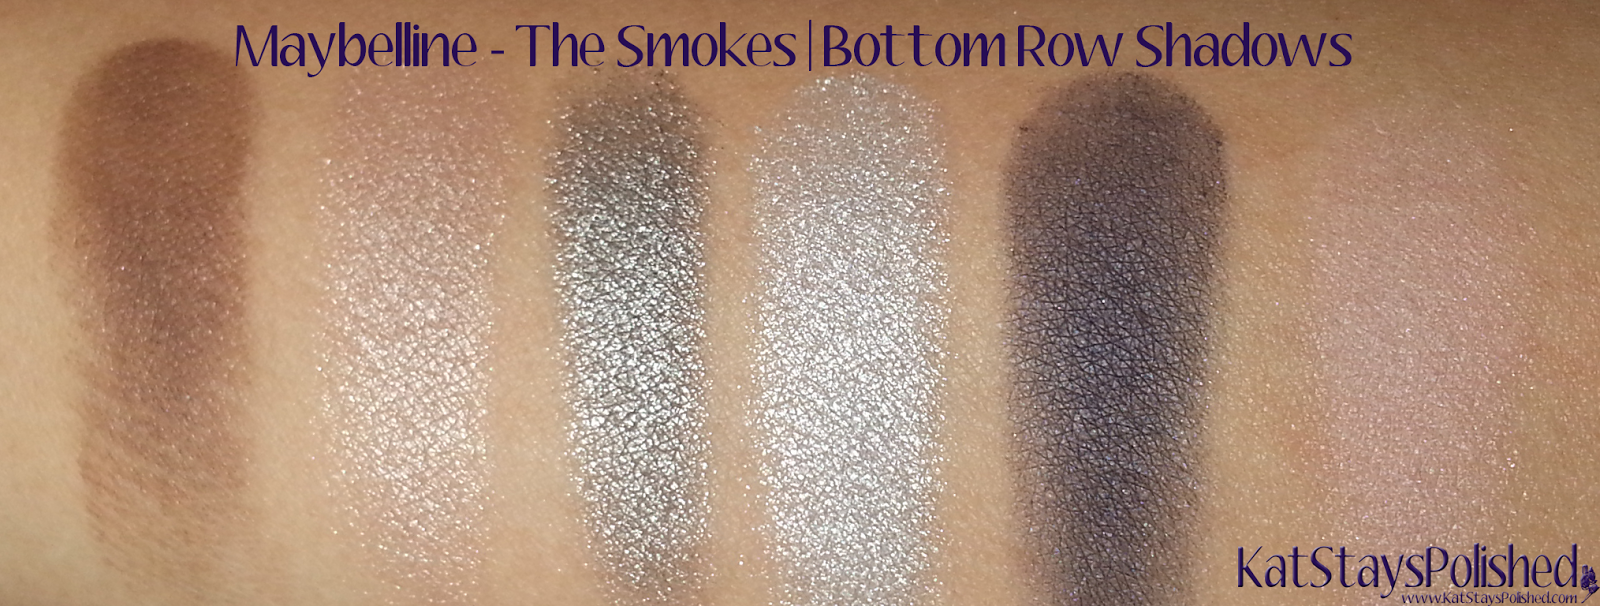 Maybelline - The Smokes Eye Shadow Palette | Kat Stays Polished